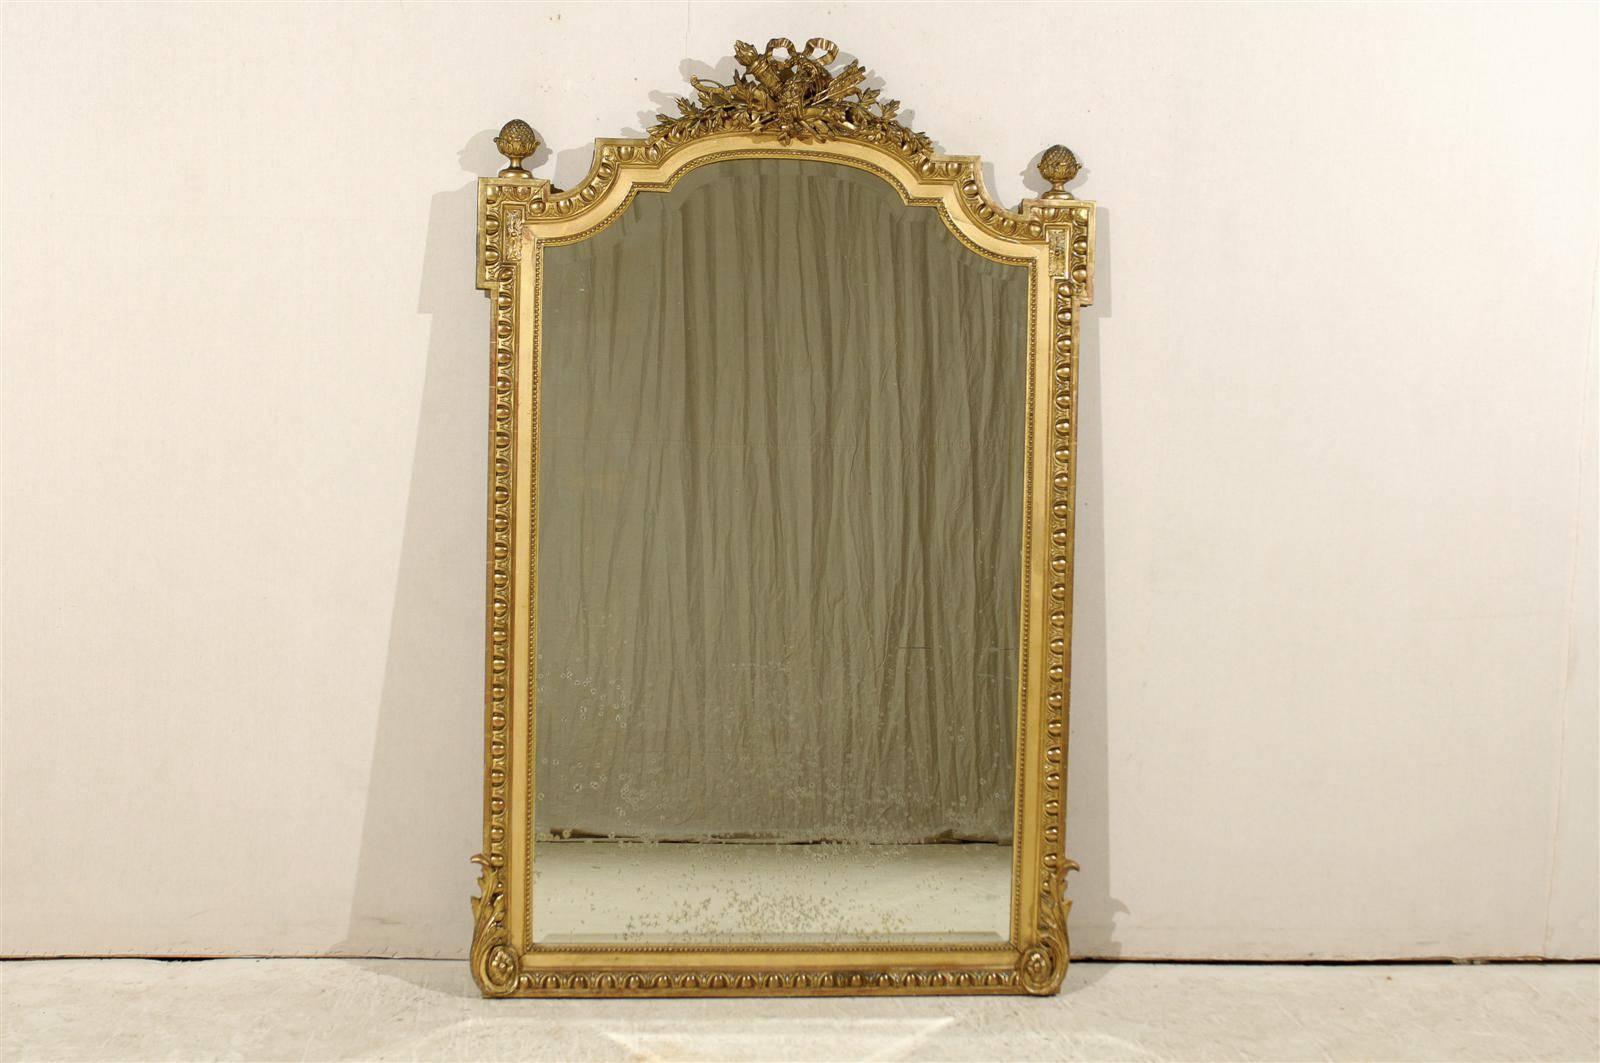 a 3.5ft by 5.5ft mirror is placed in a wooden frame. what is the area of the frame